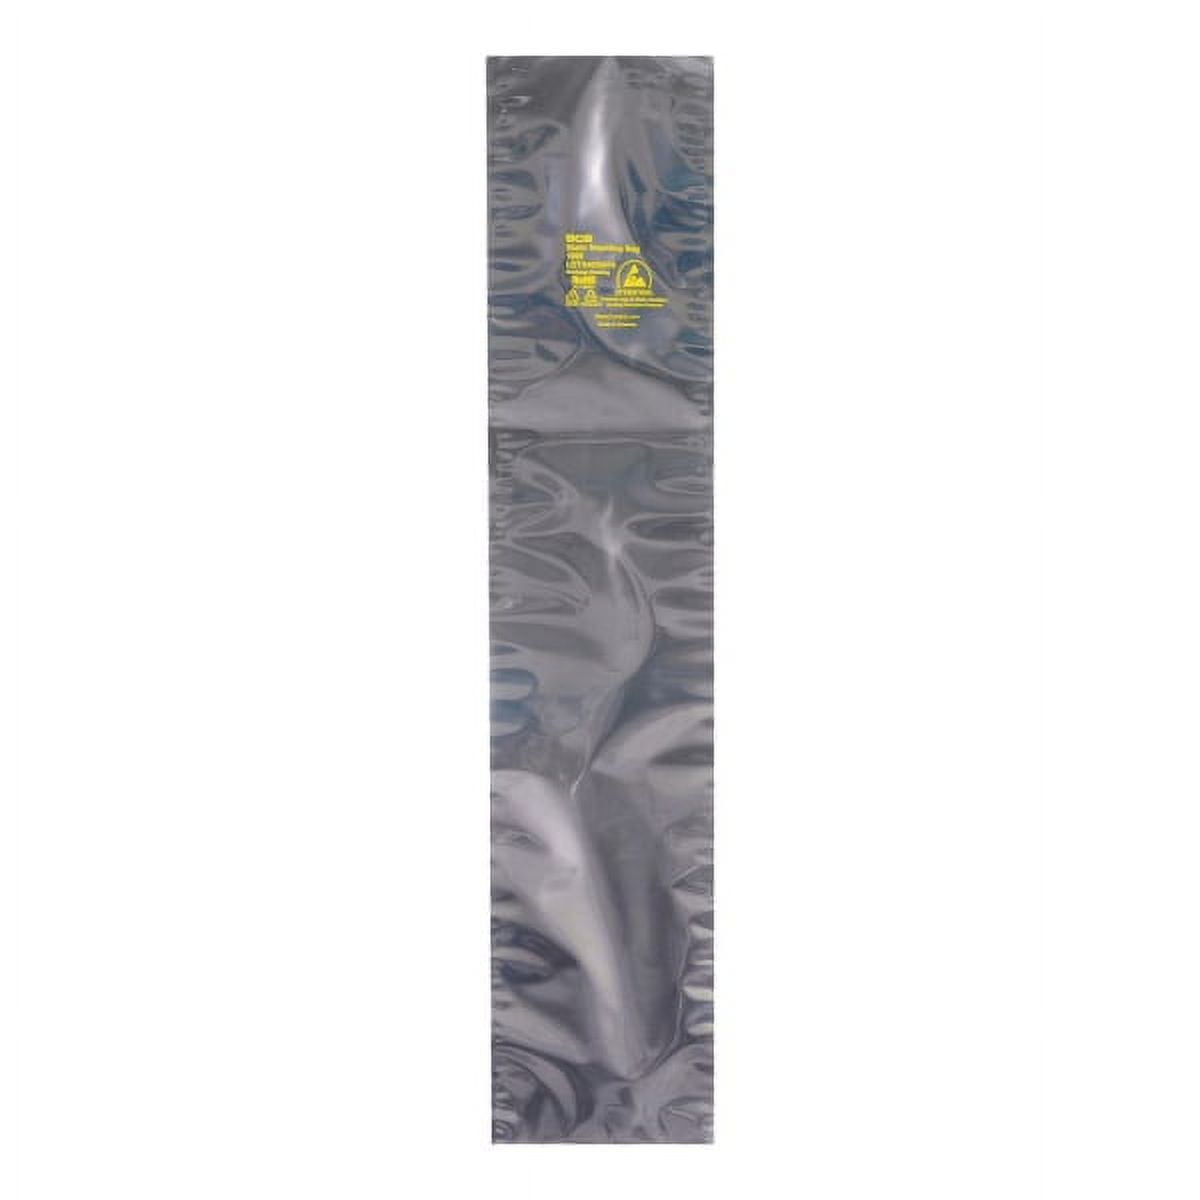 Stc177 12 X 20 In. 3.1 Mil Open End Static Shielding Bags Case, Pack Of 100